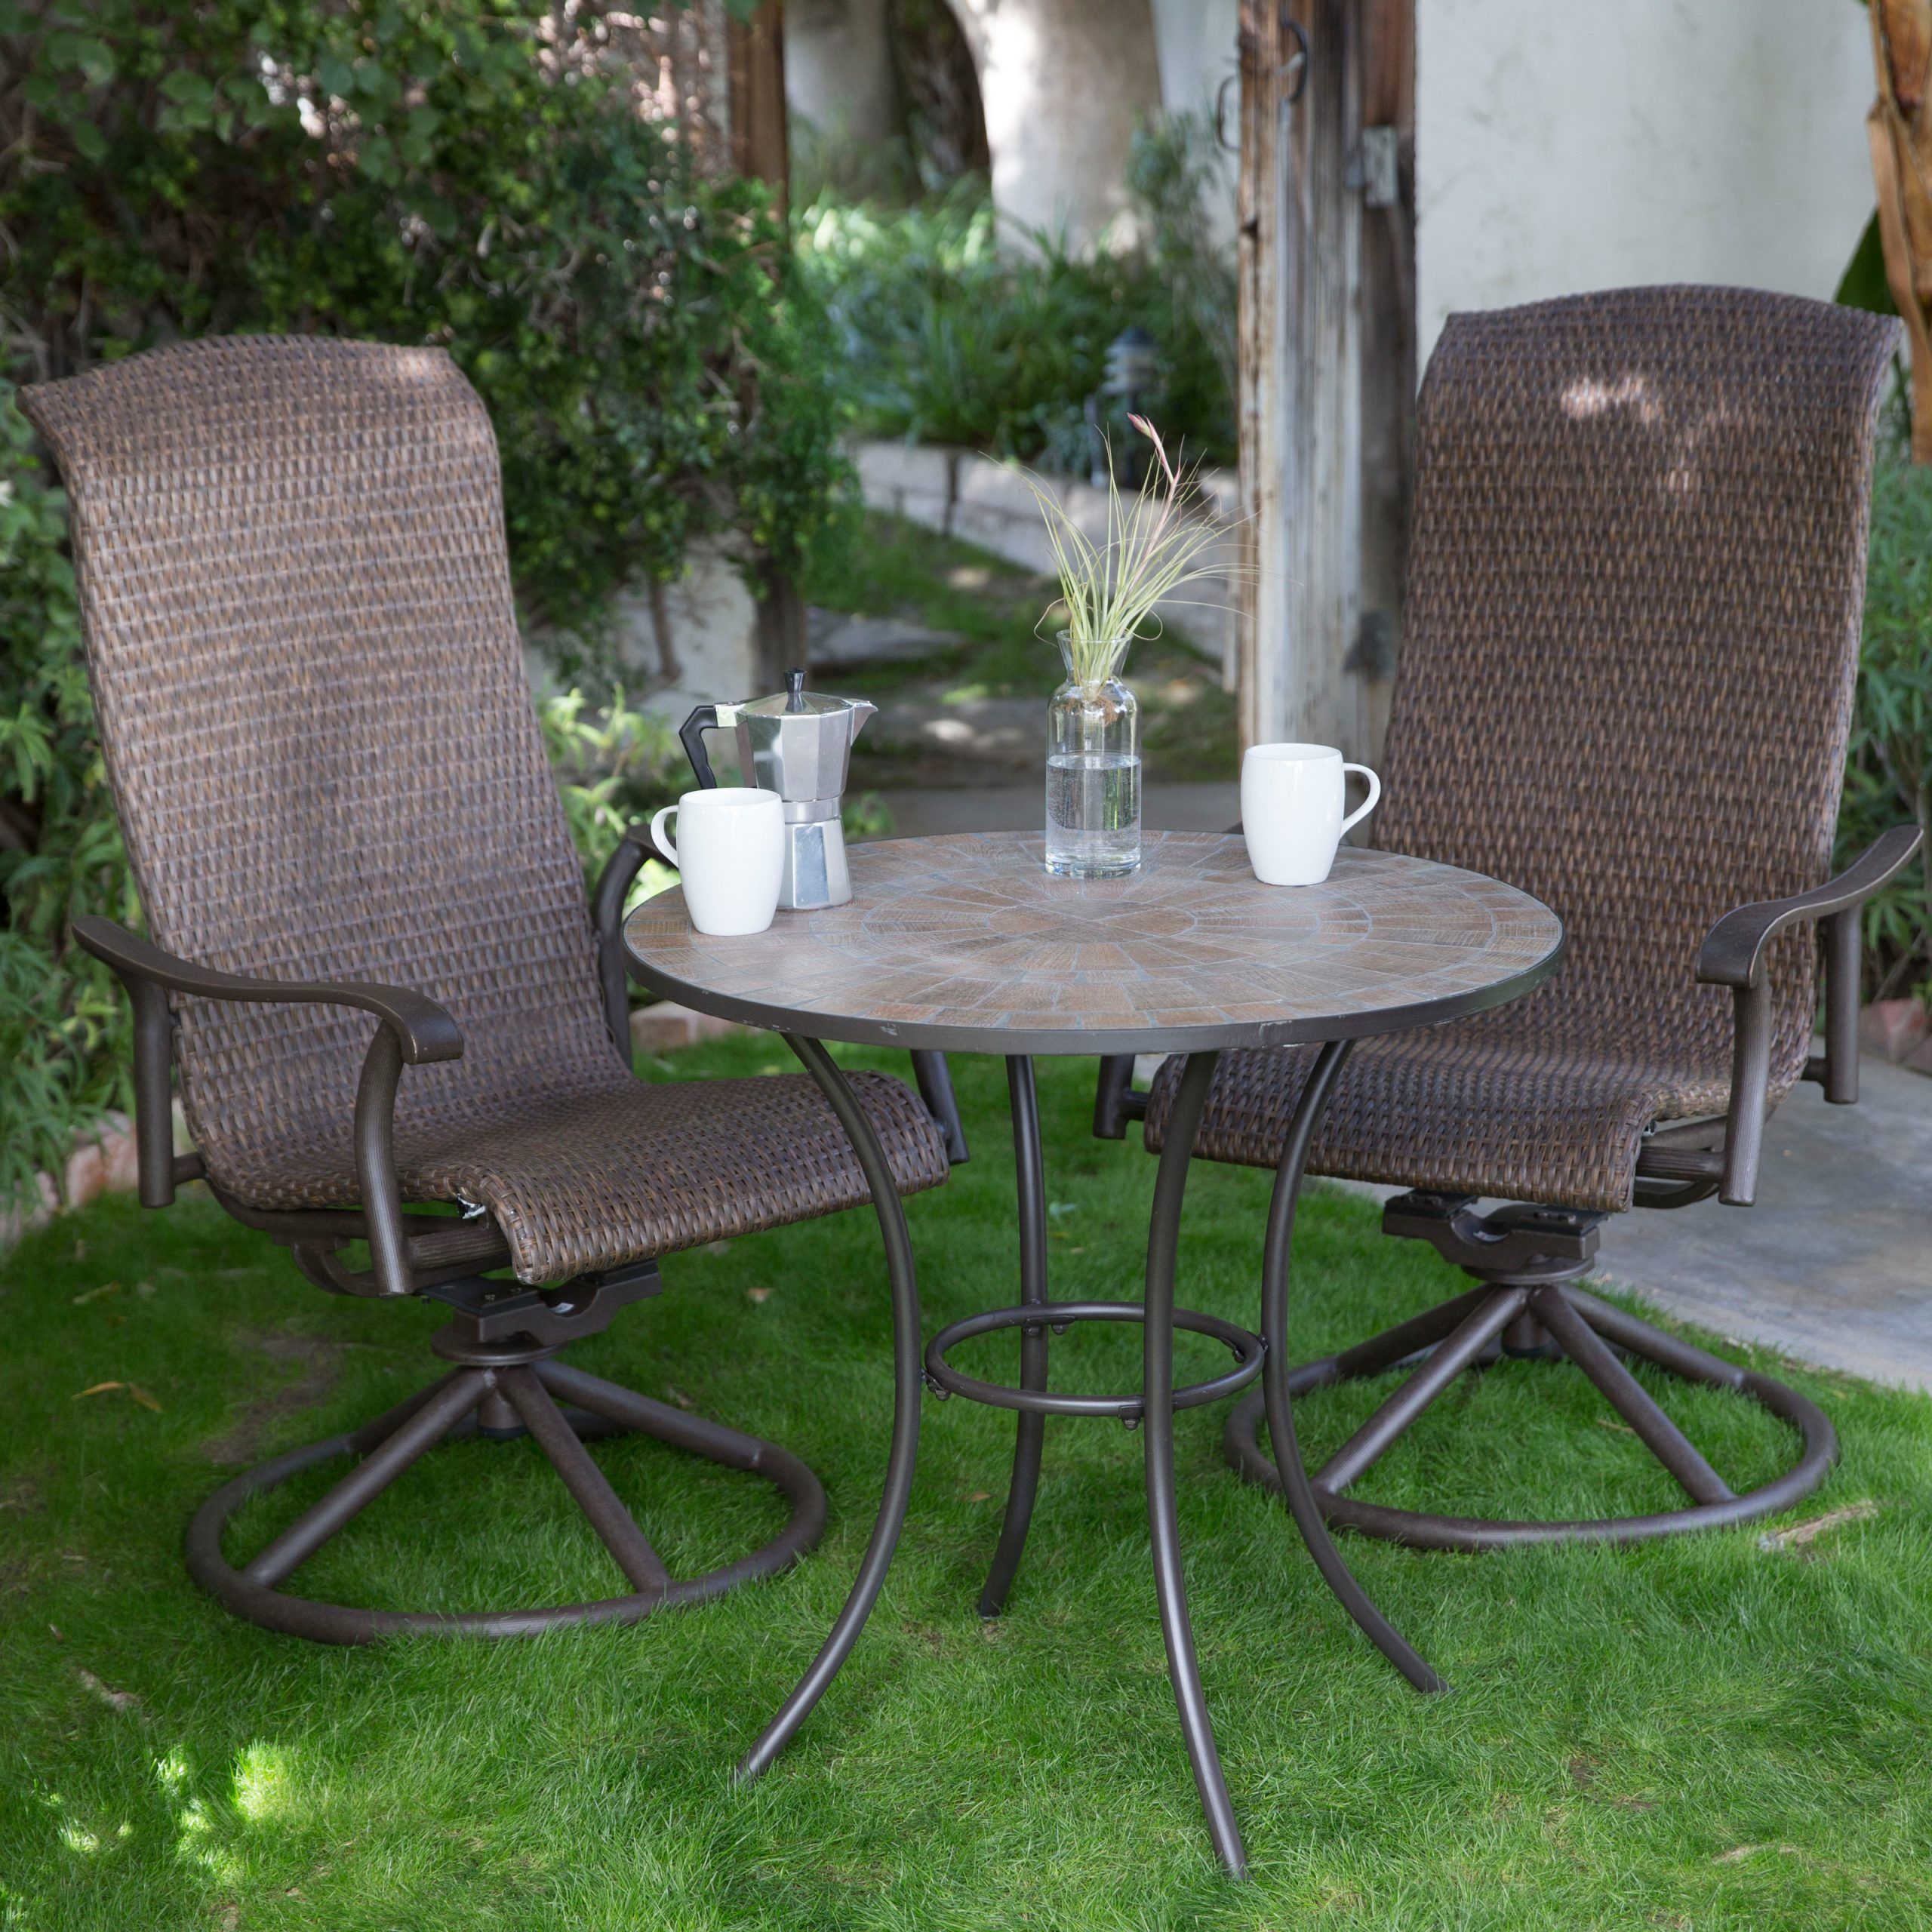 Belham Living Tinsley 3 Piece Wicker Bistro Set – Outdoor Bistro Sets With Regard To Newest Outdoor Wicker Cafe Dining Sets (View 6 of 15)